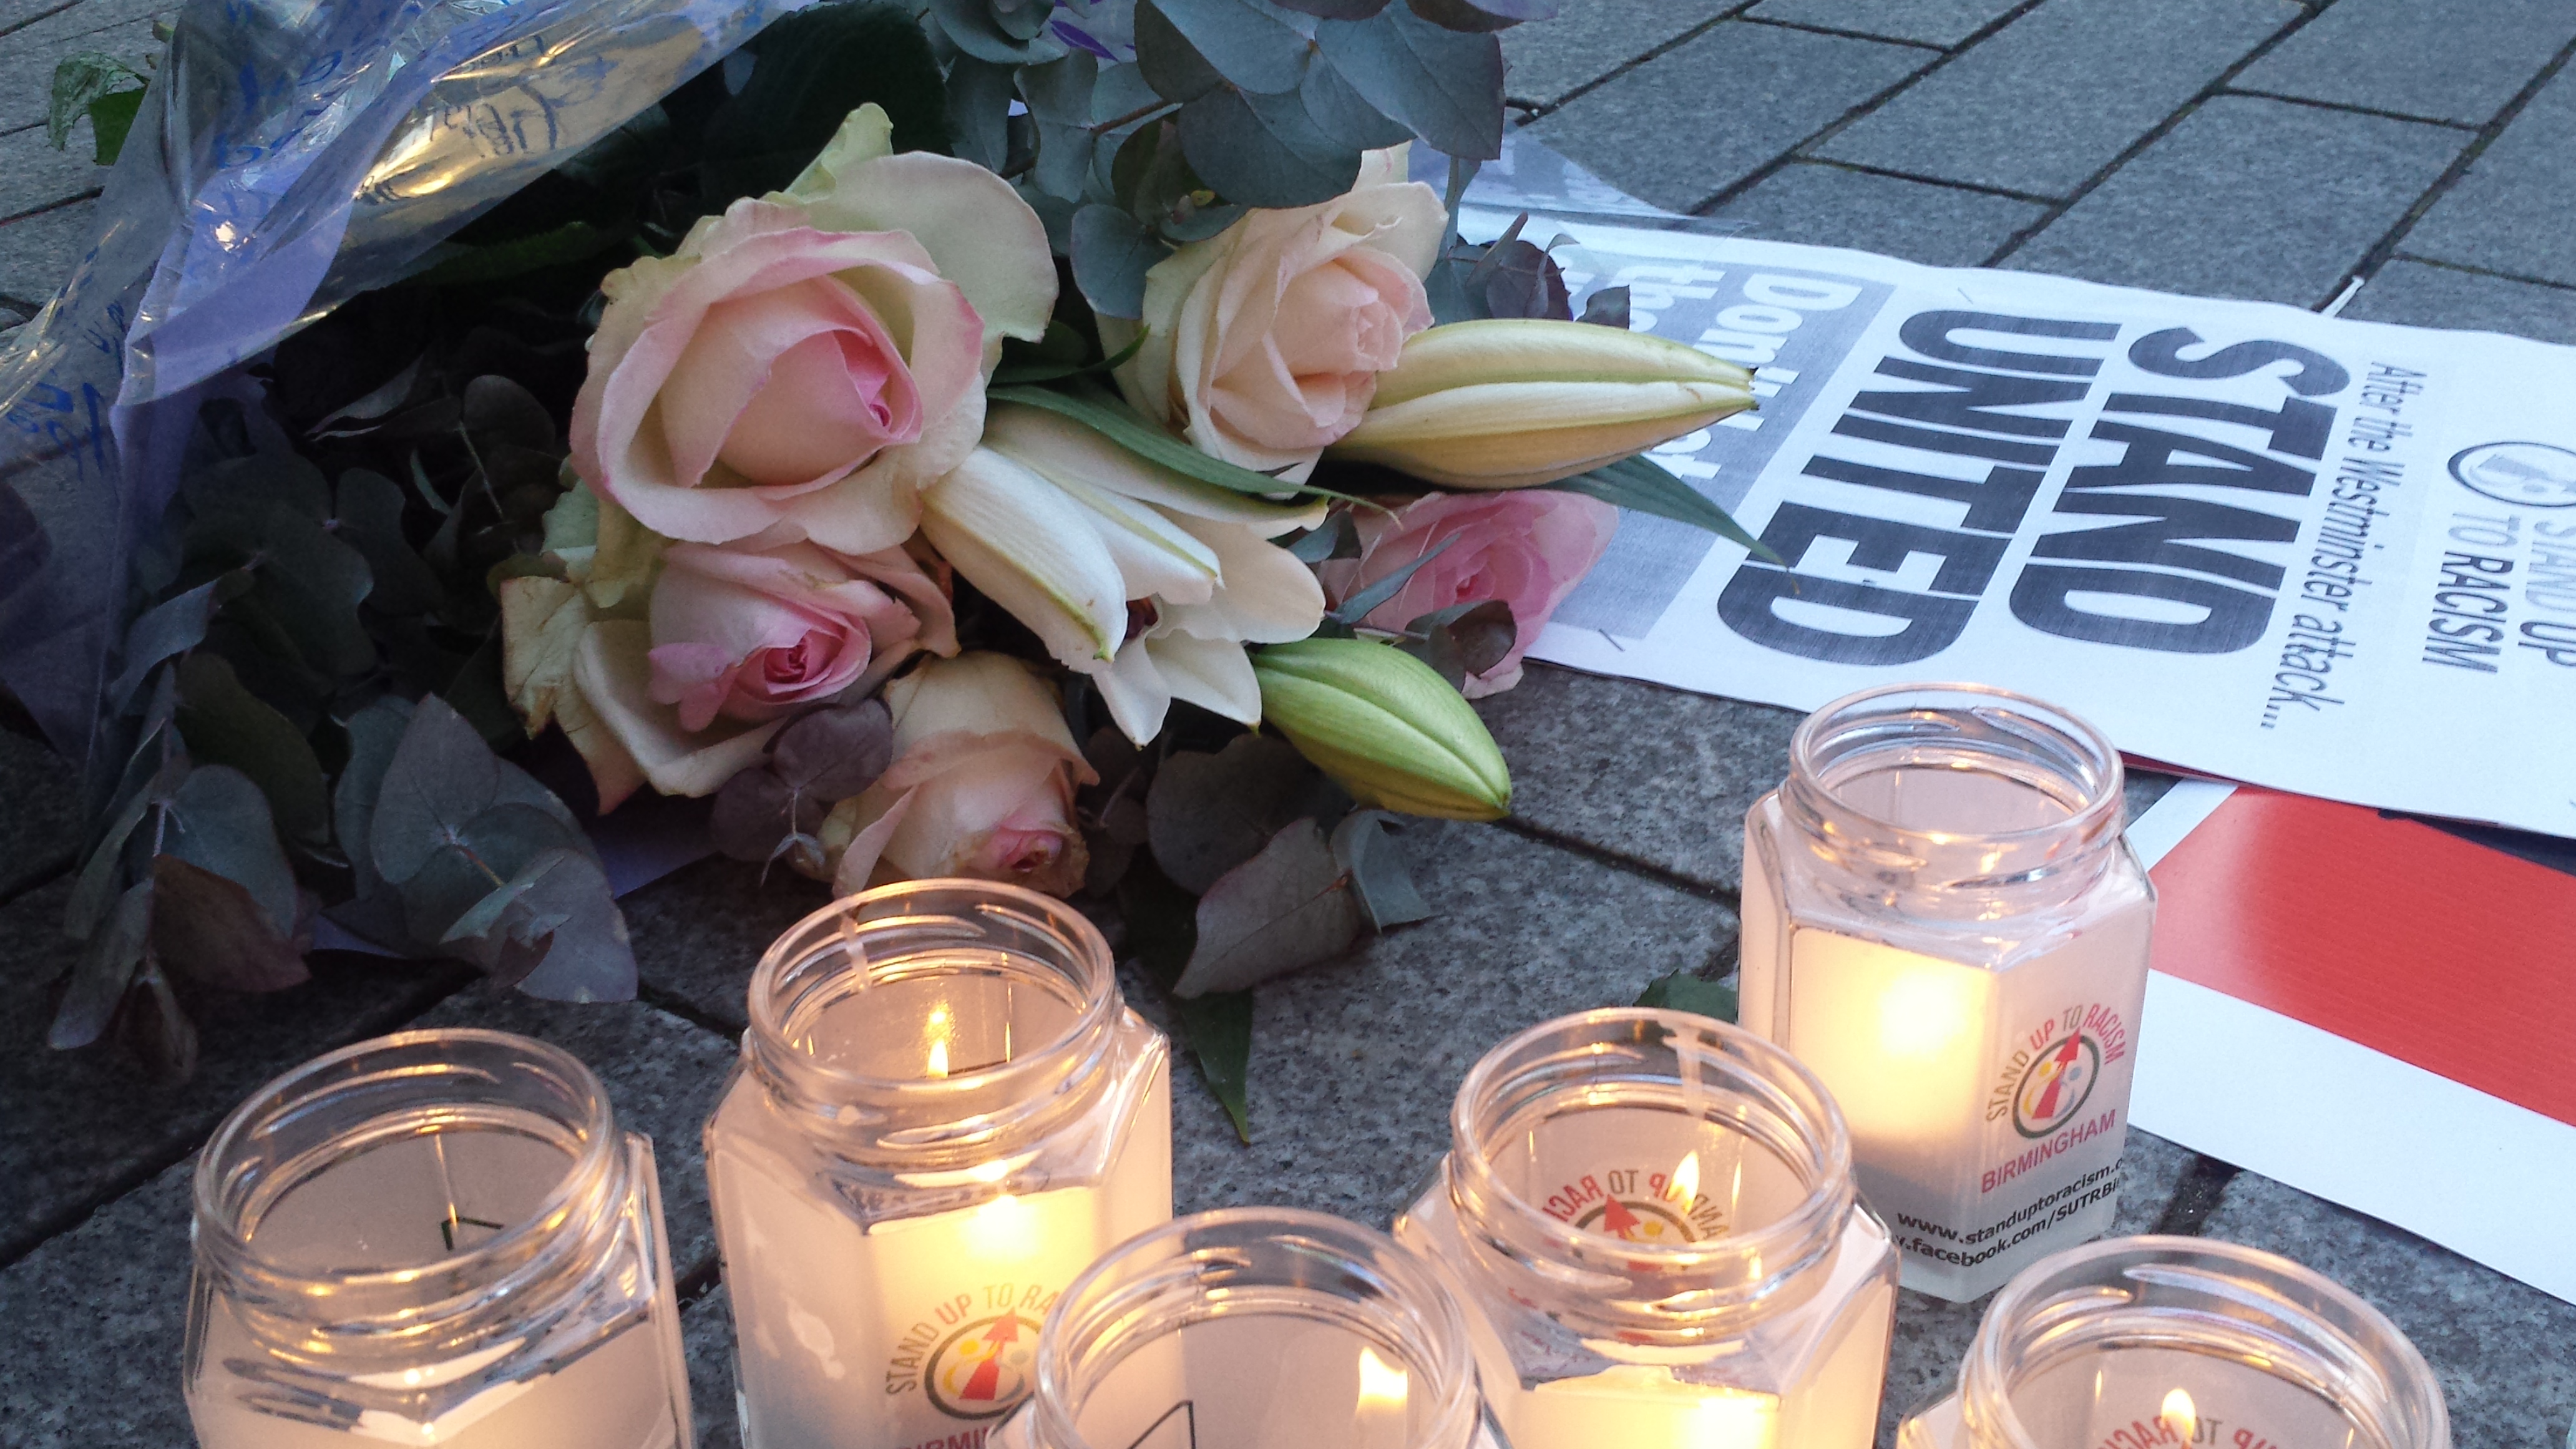 Candle-lit vigil held in Birmingham for victims of London attacks